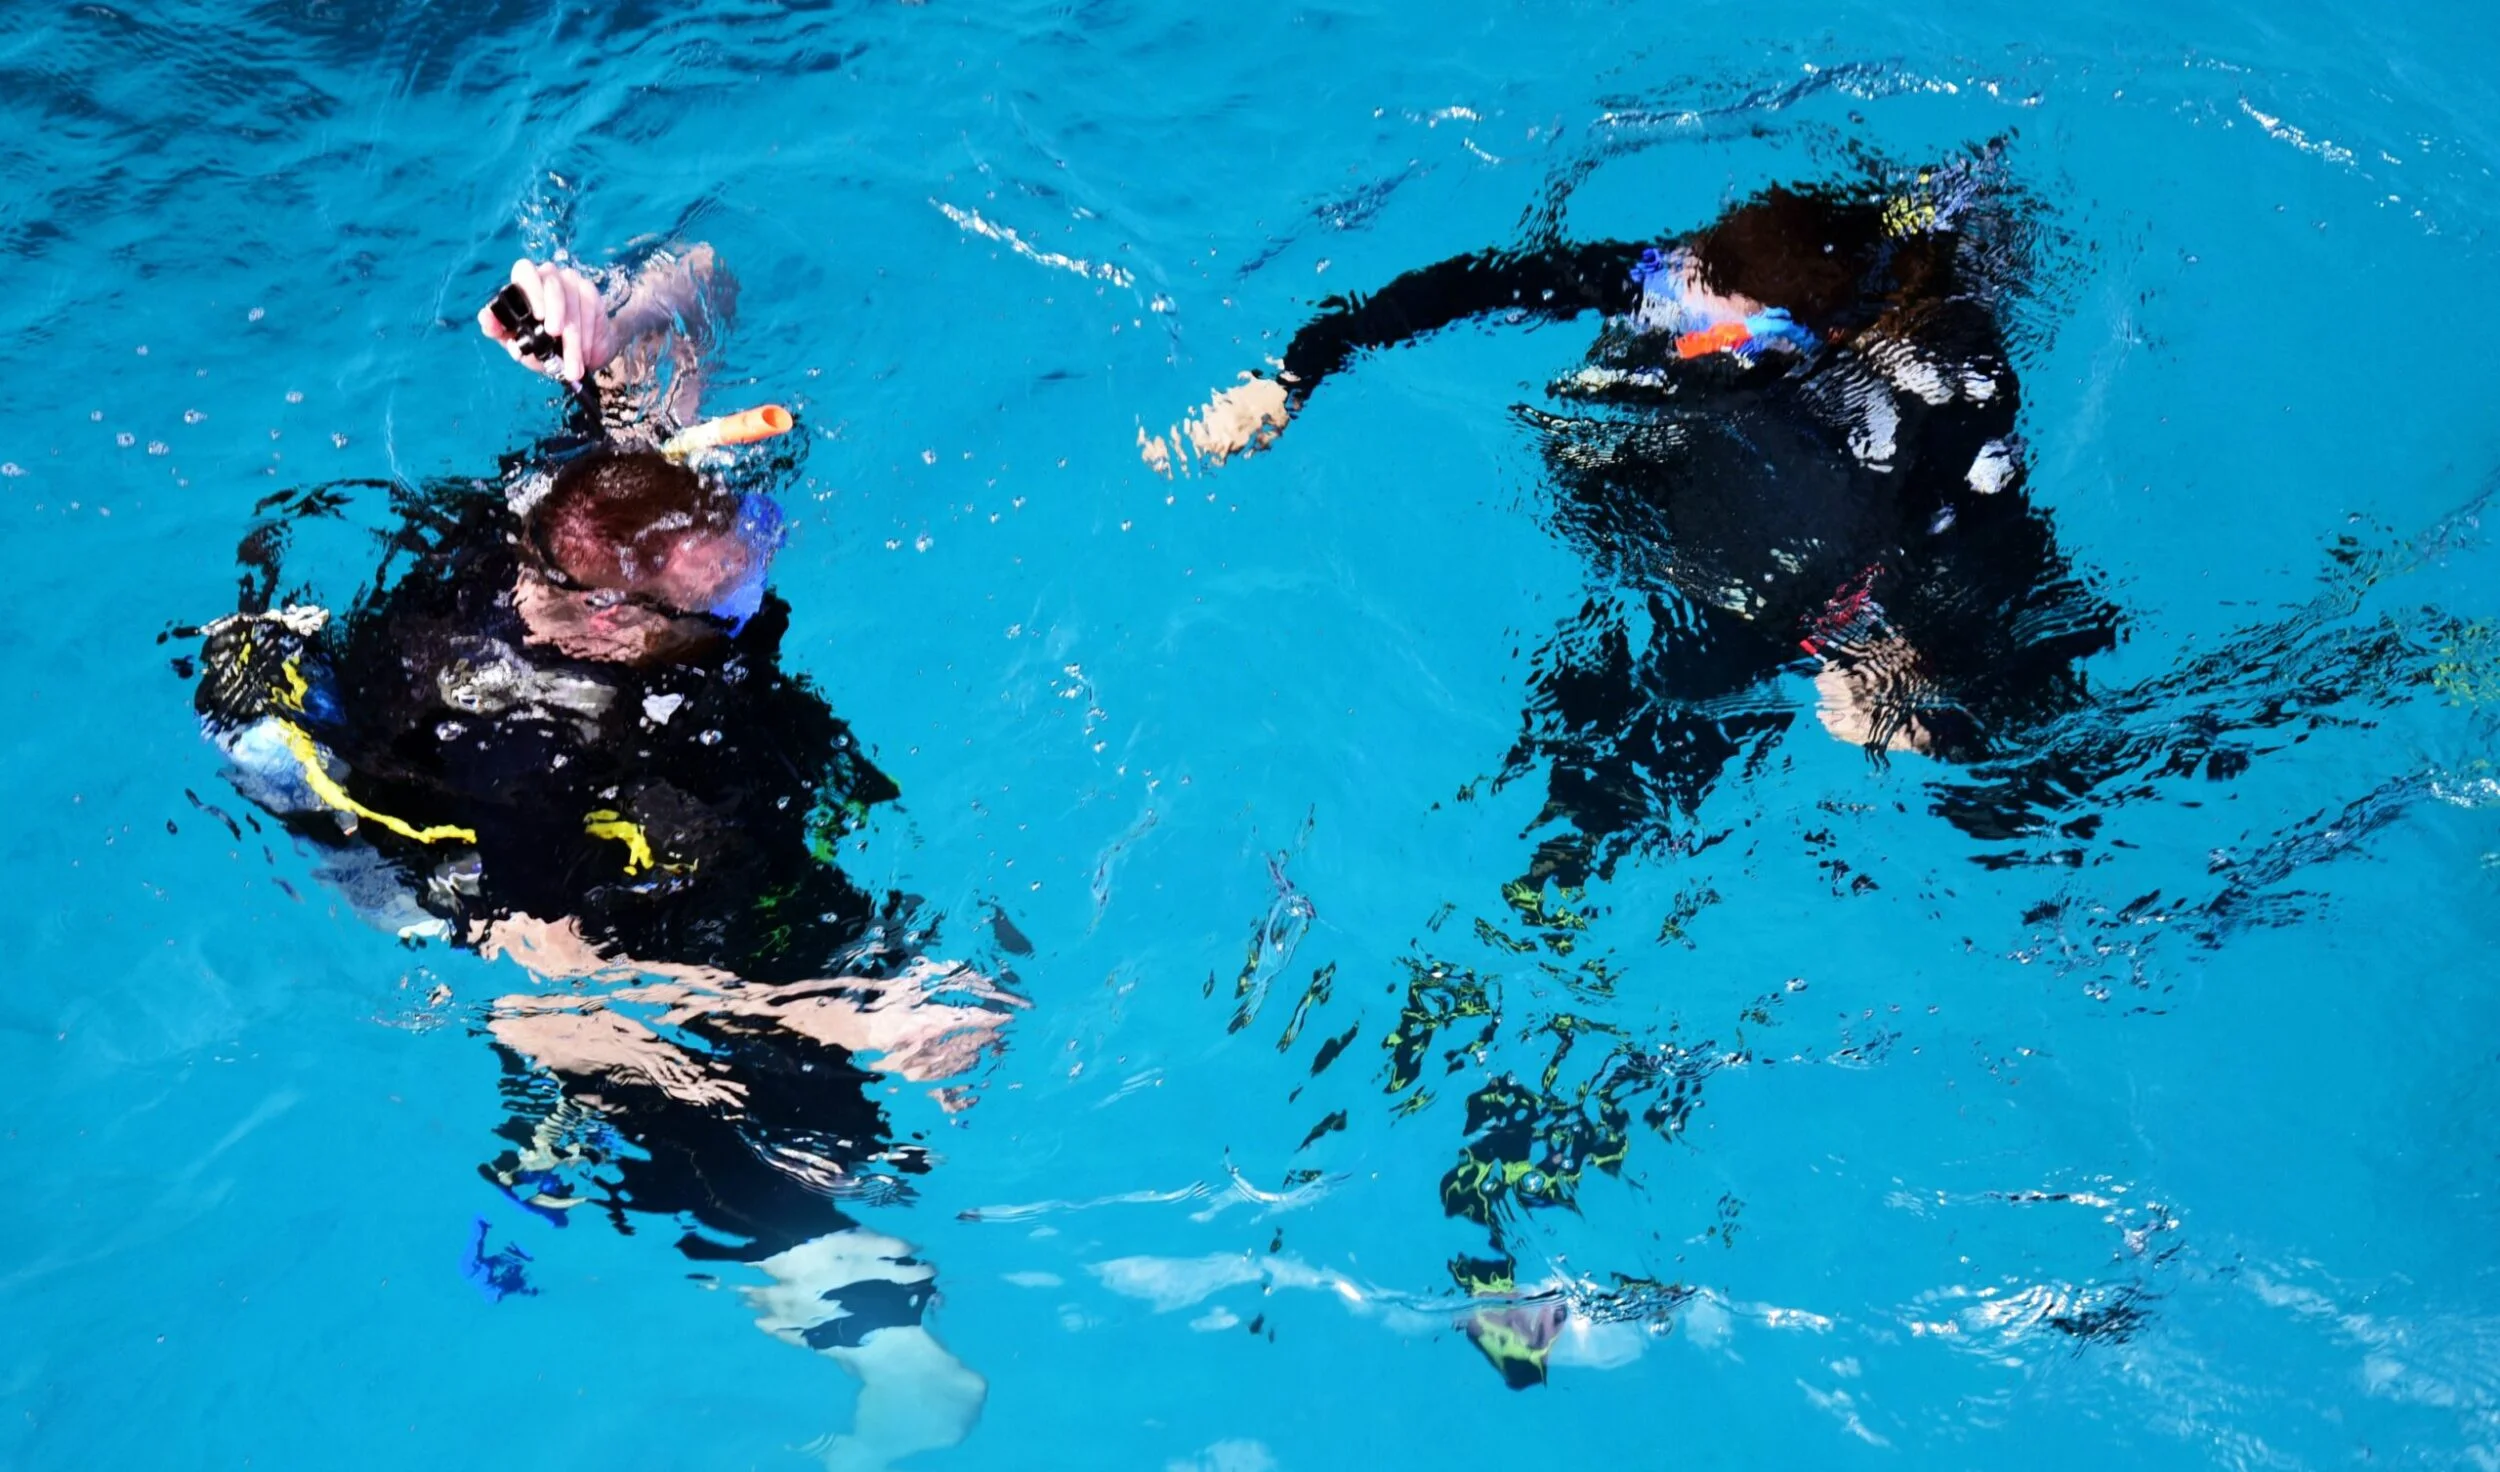 Student performing a buoyancy test while instructor checks if everyting is OK - Photo By Laya Clode on Unsplash